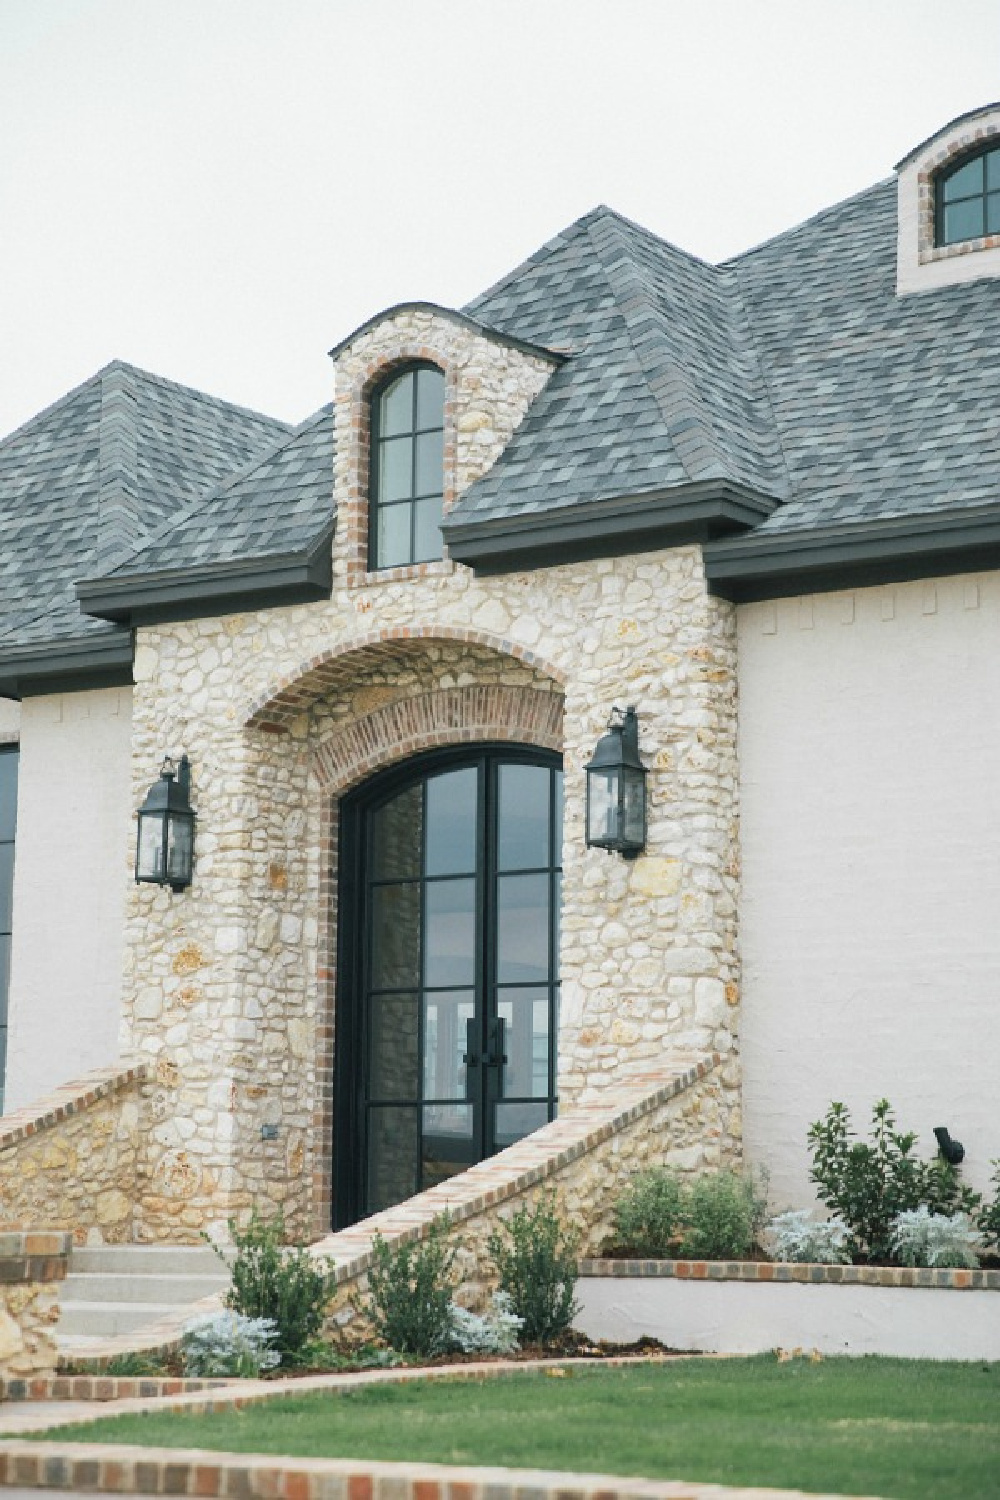 Detail of brick and stone on French country new house exterior. Brit Jones photography.